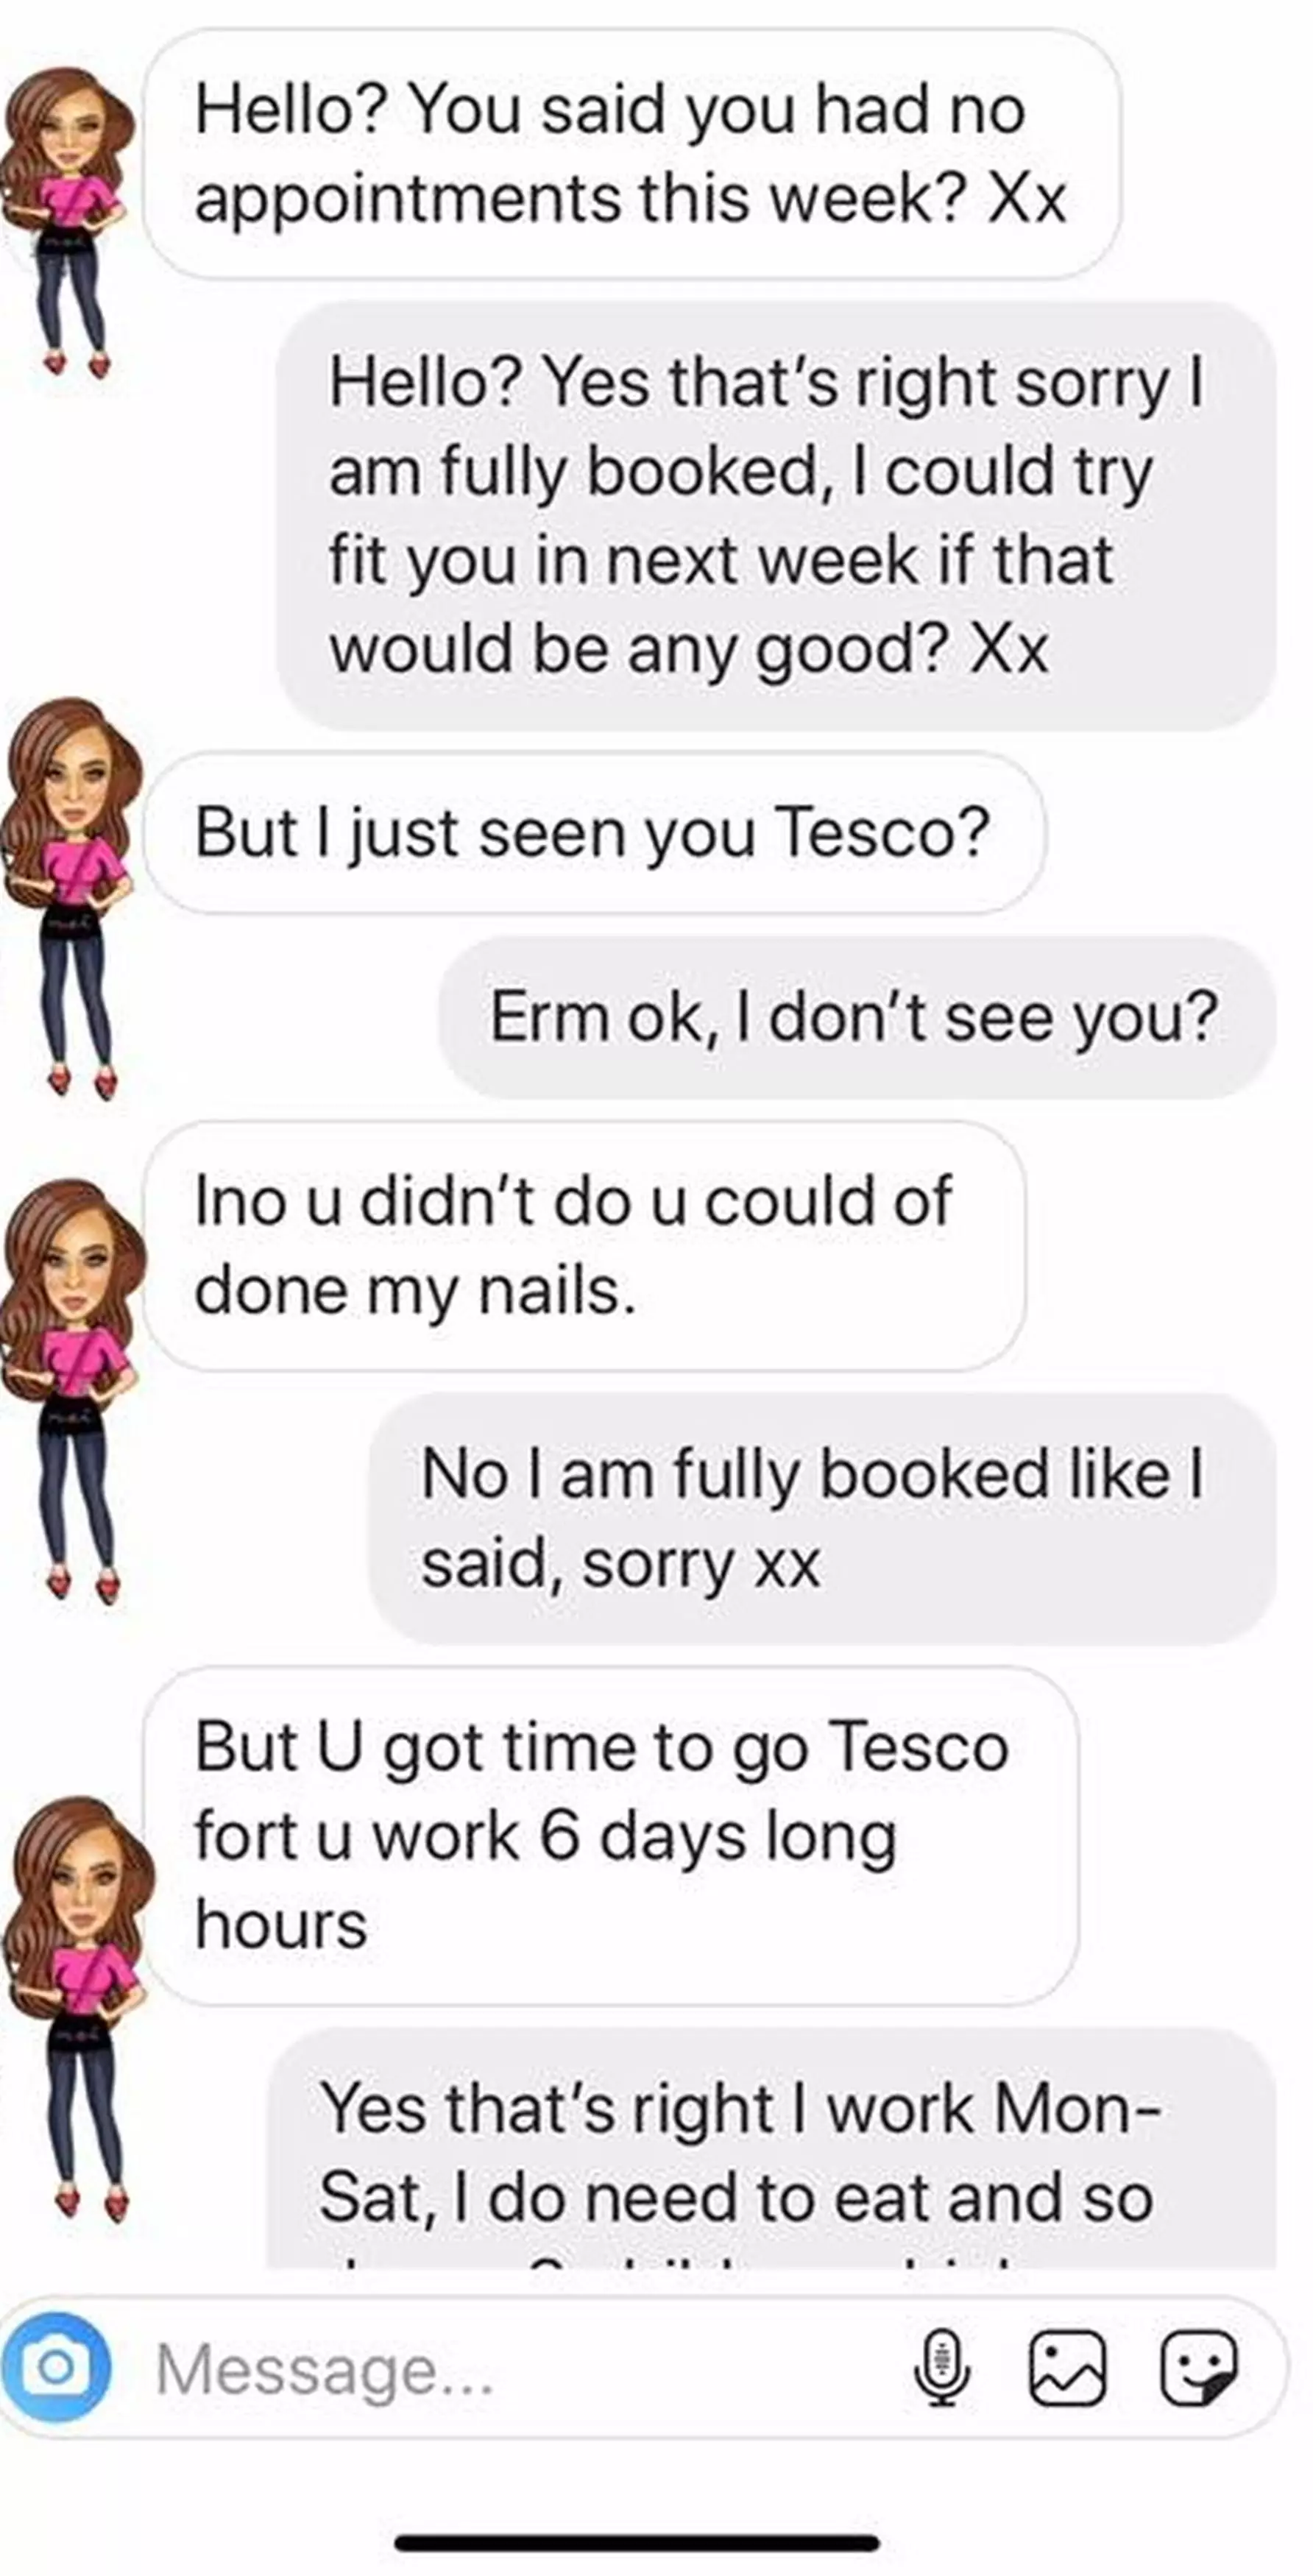 Danielle received the pushy messages from her client at 9pm in the evening. (